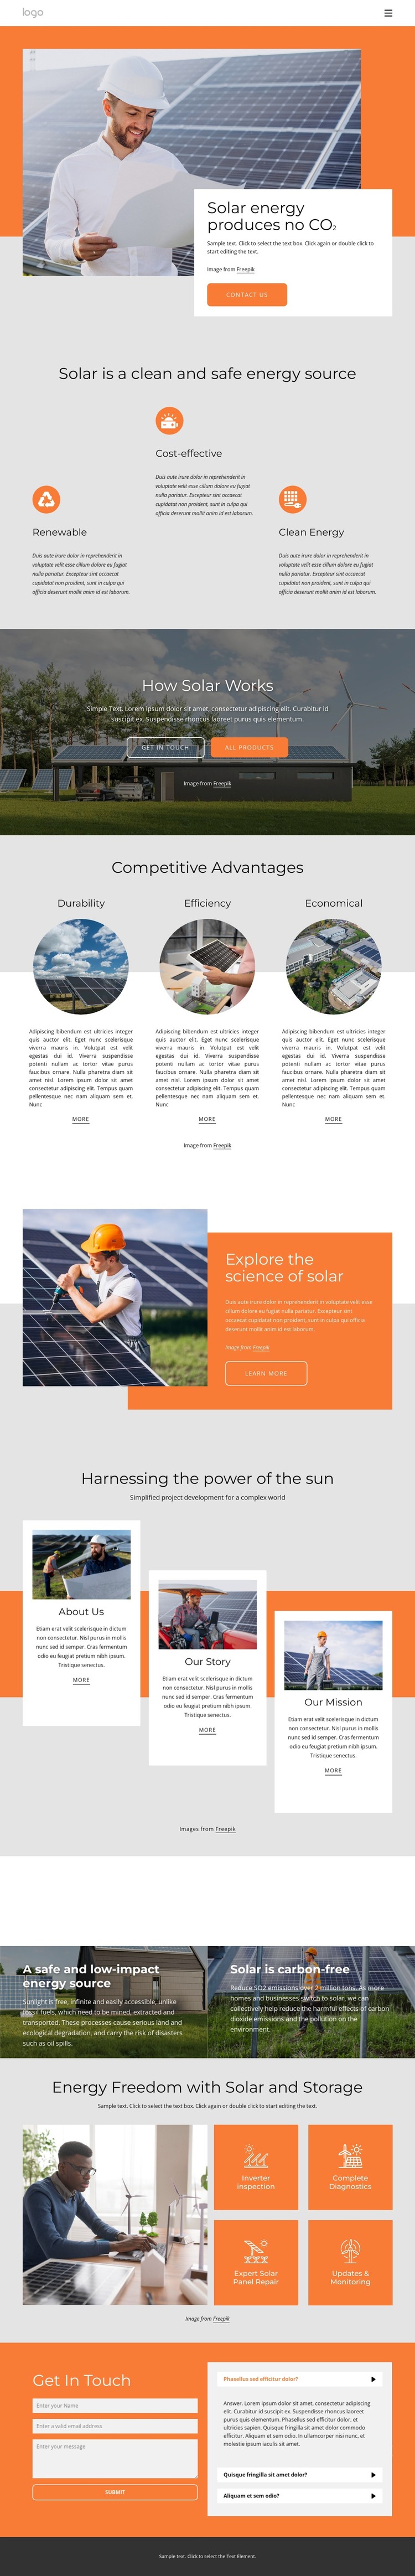 Power your home with clean solar energy WordPress Theme